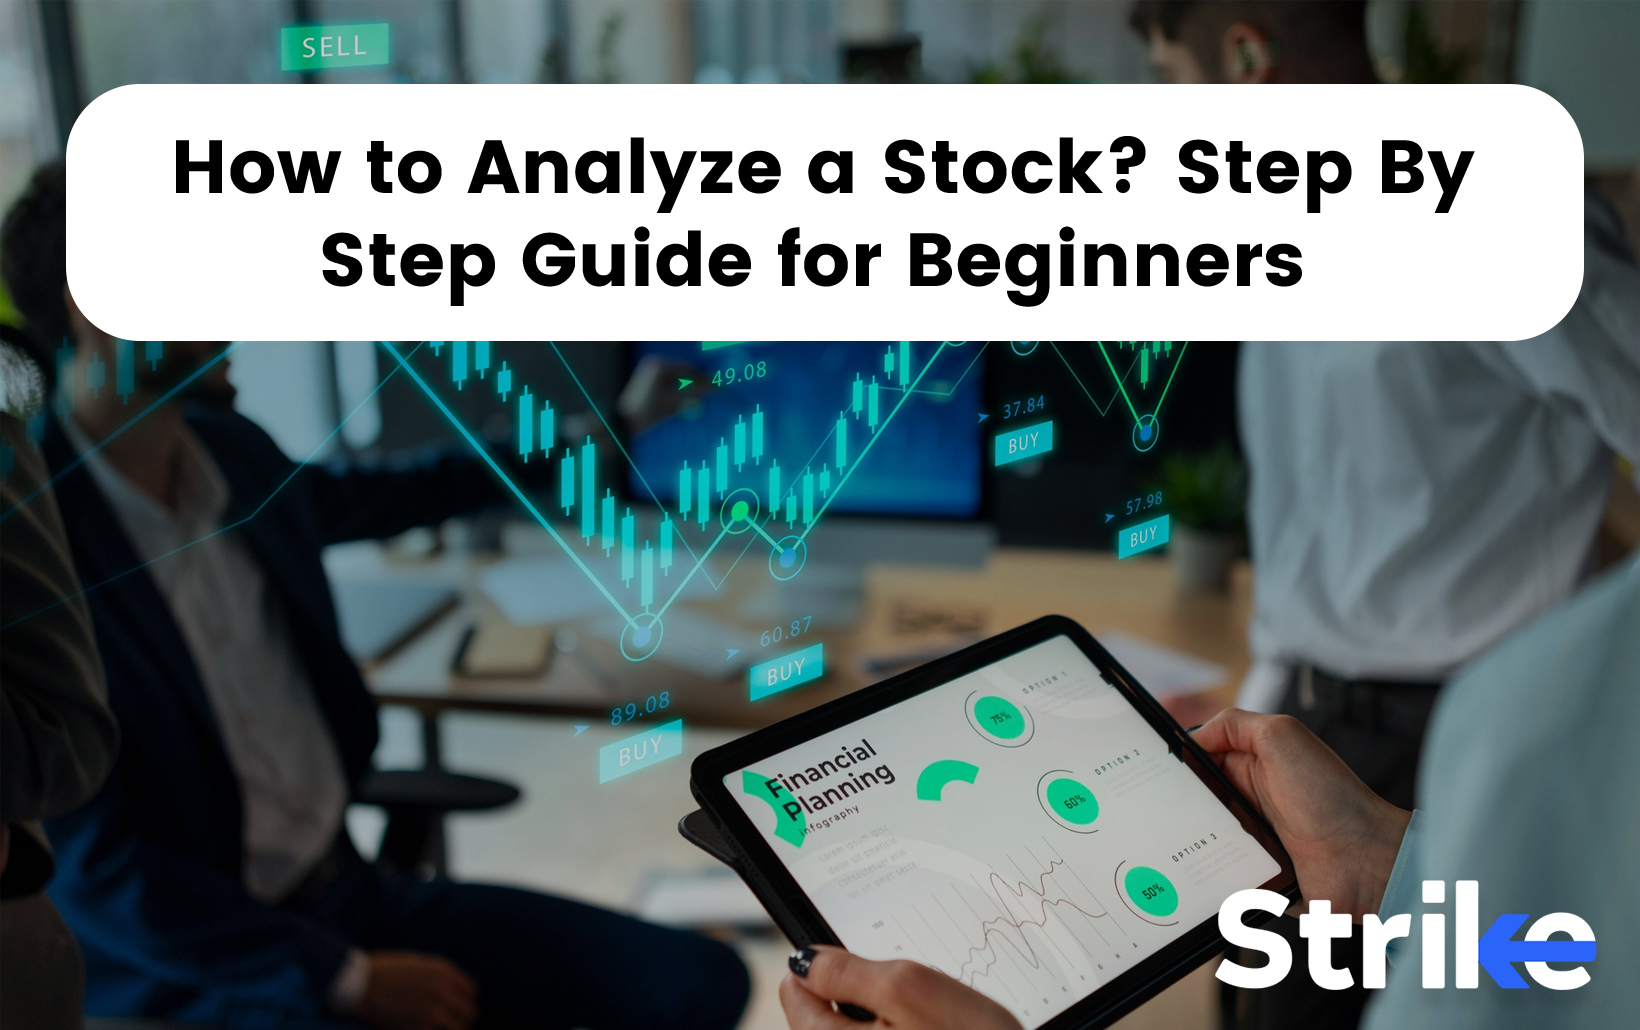 How to Analyze a Stock? 12 Steps Guide for Beginners